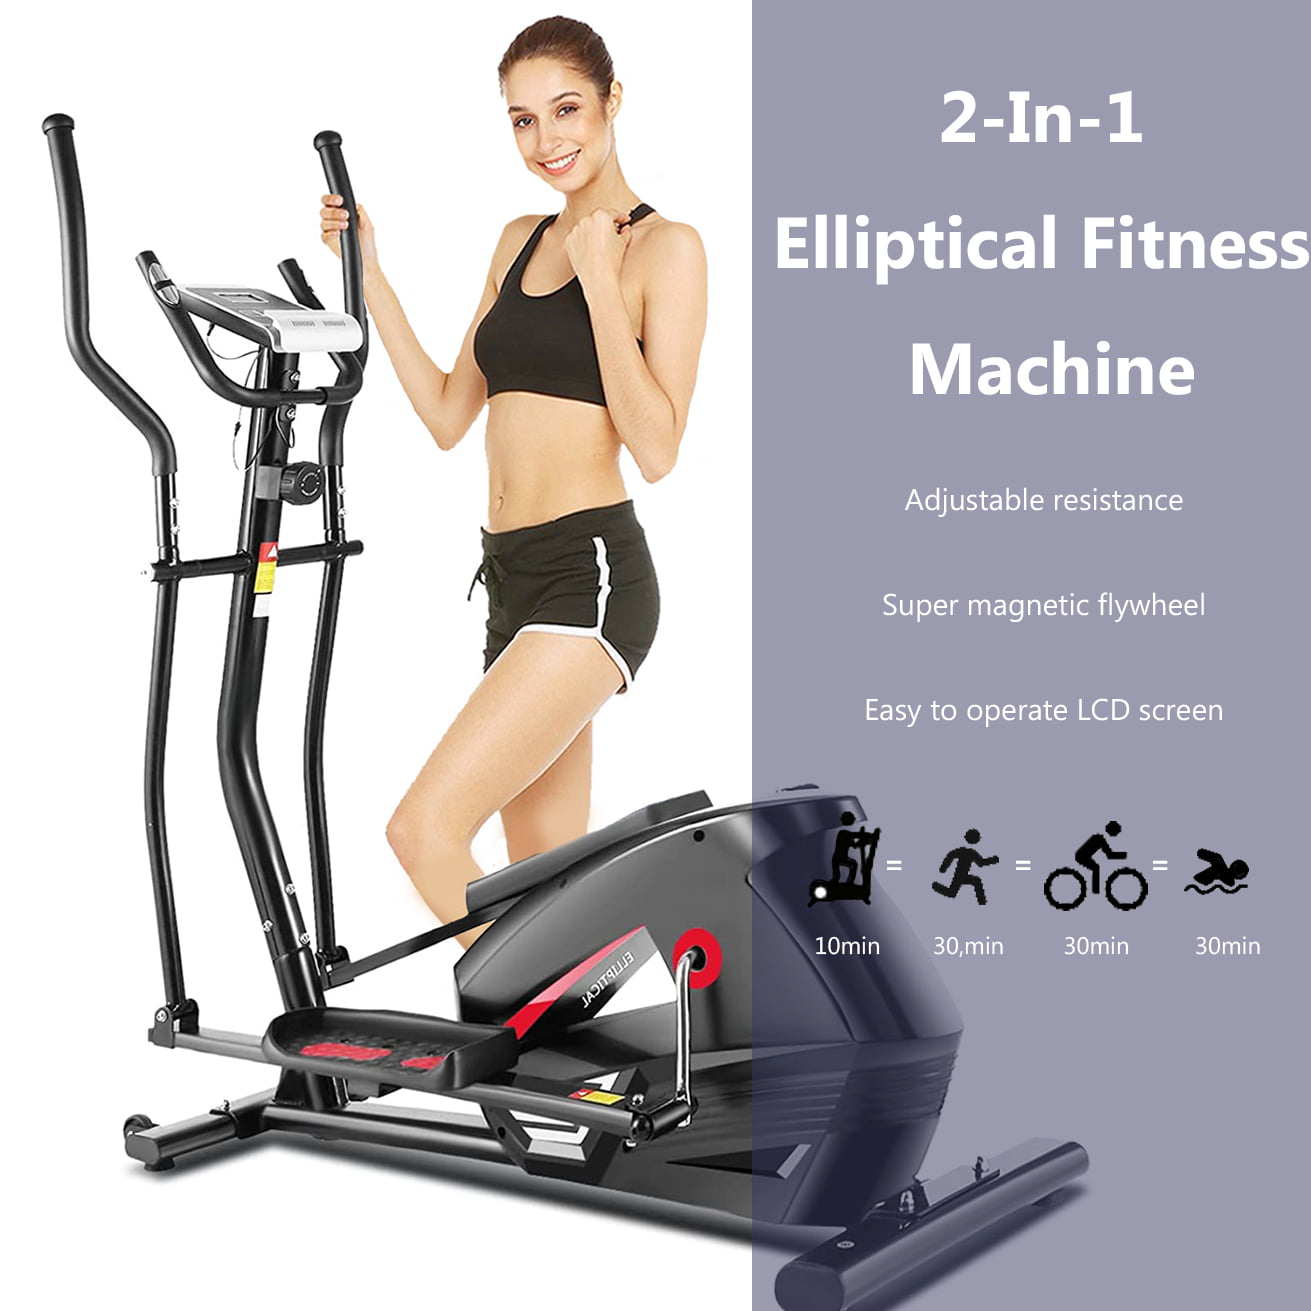 Smooth Quiet Driven Cardio Cross Trainer Pulse Rate Grips ANCHEER Elliptical Training Machines Elliptical Machine for Home Use with 8 Level Magnetic Resistance LCD Monitor 